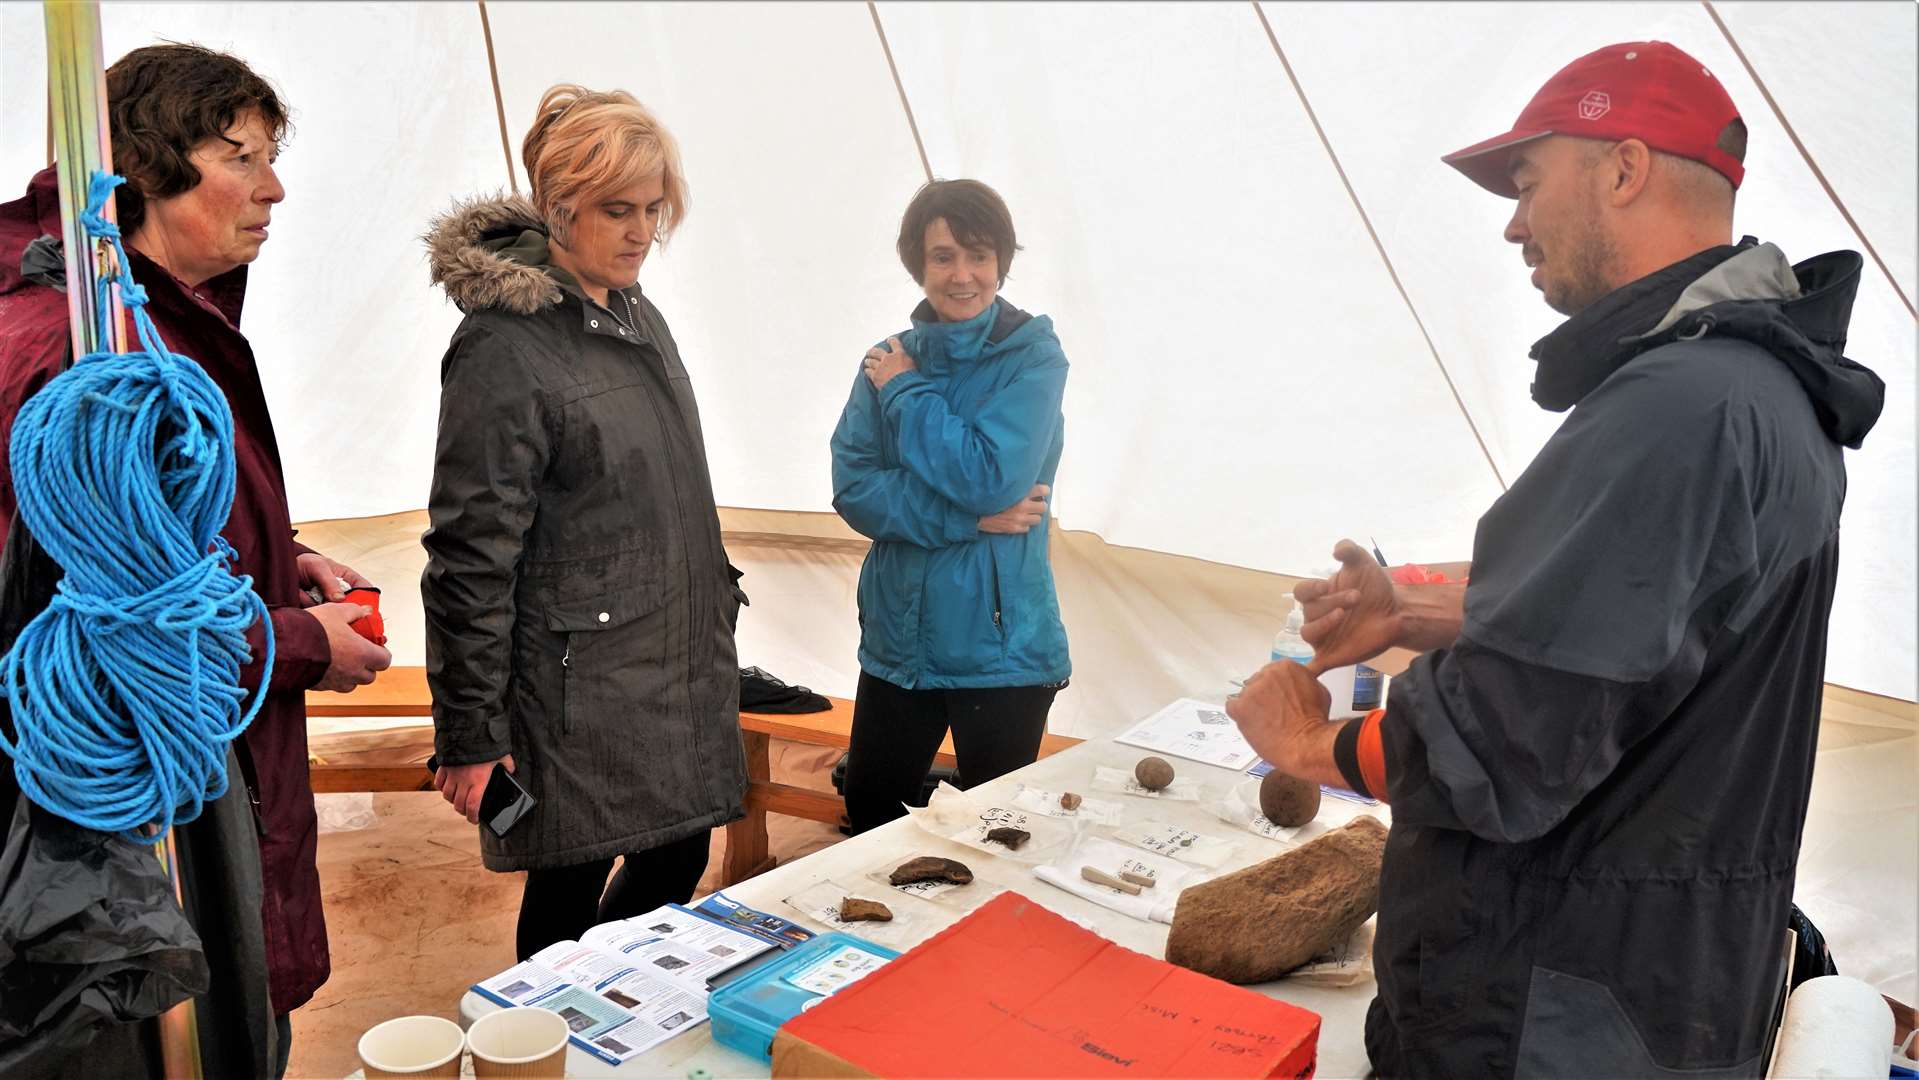 Rick Barton, project officer at the dig, shows some of the items recovered to members of the public at the open day event last year.